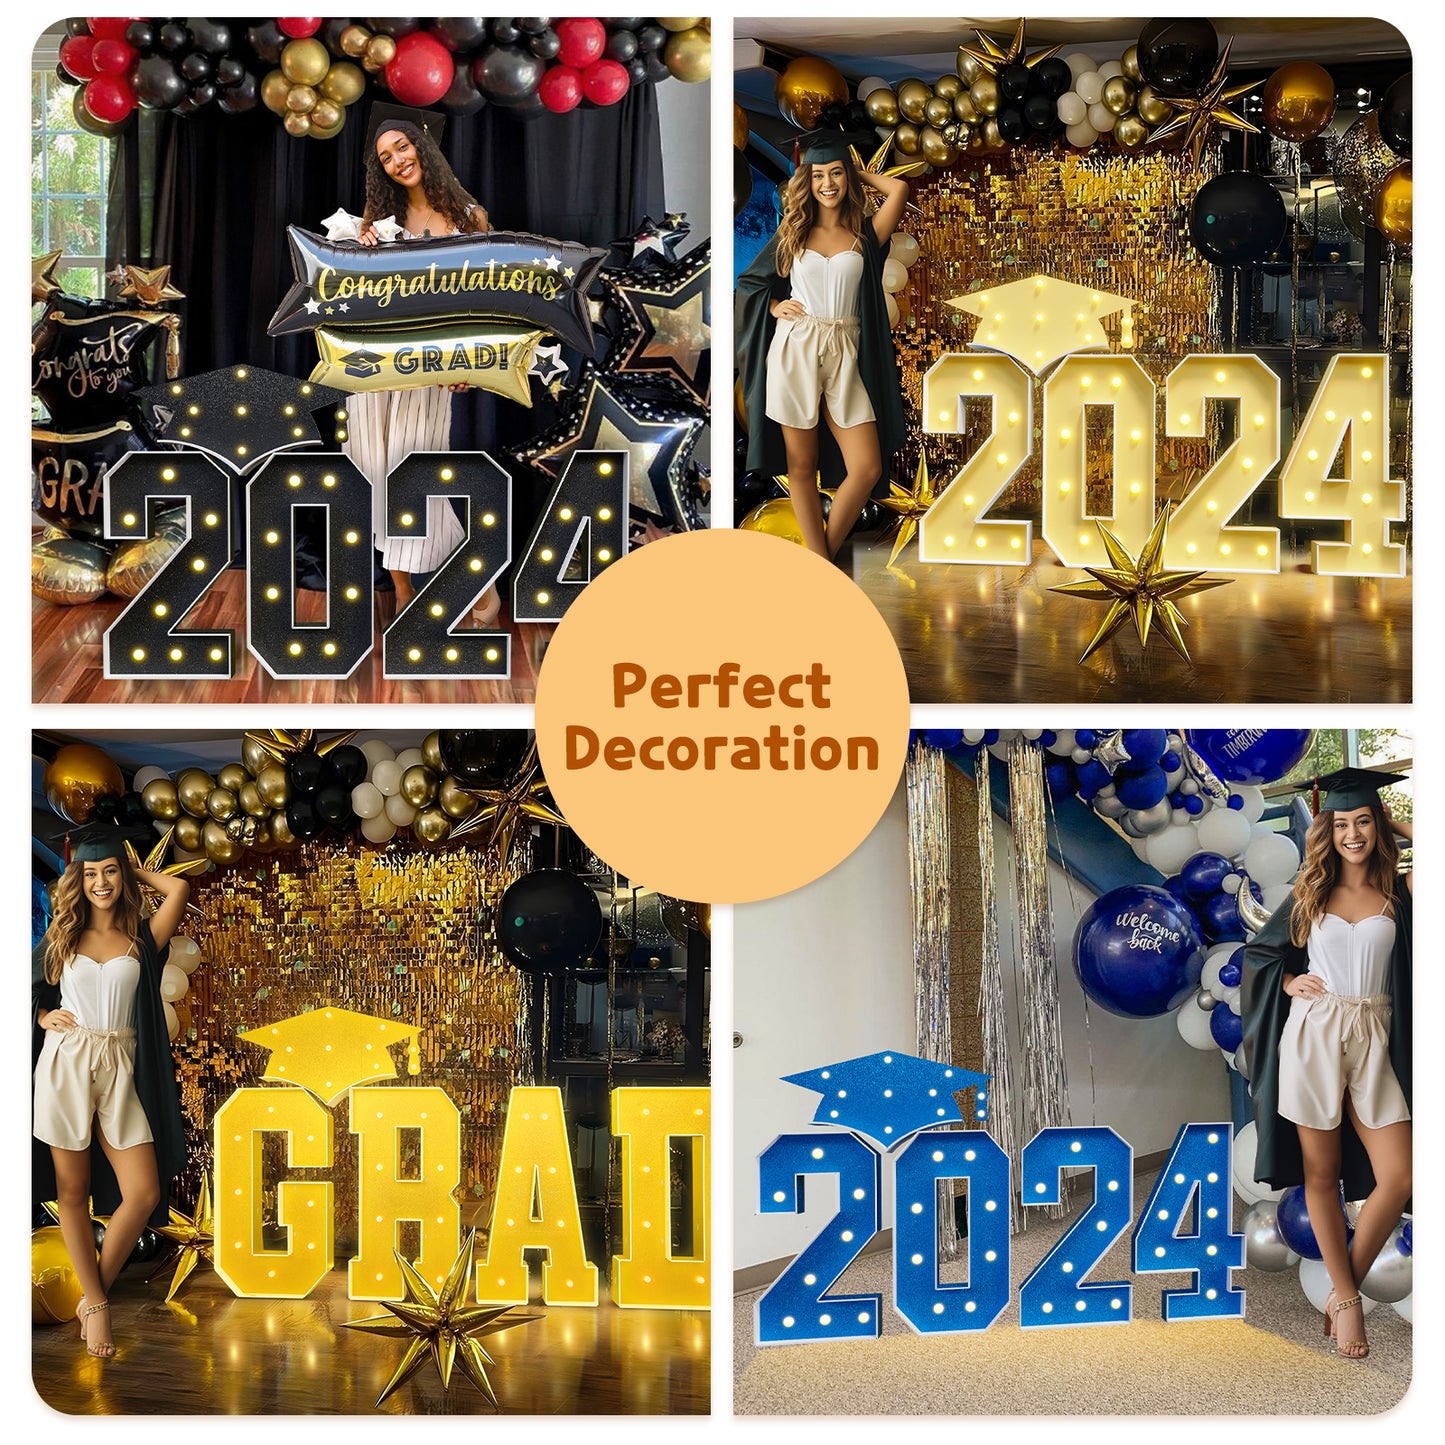 2.3FT Precut Marquee Letters DIY Kit for Graduation